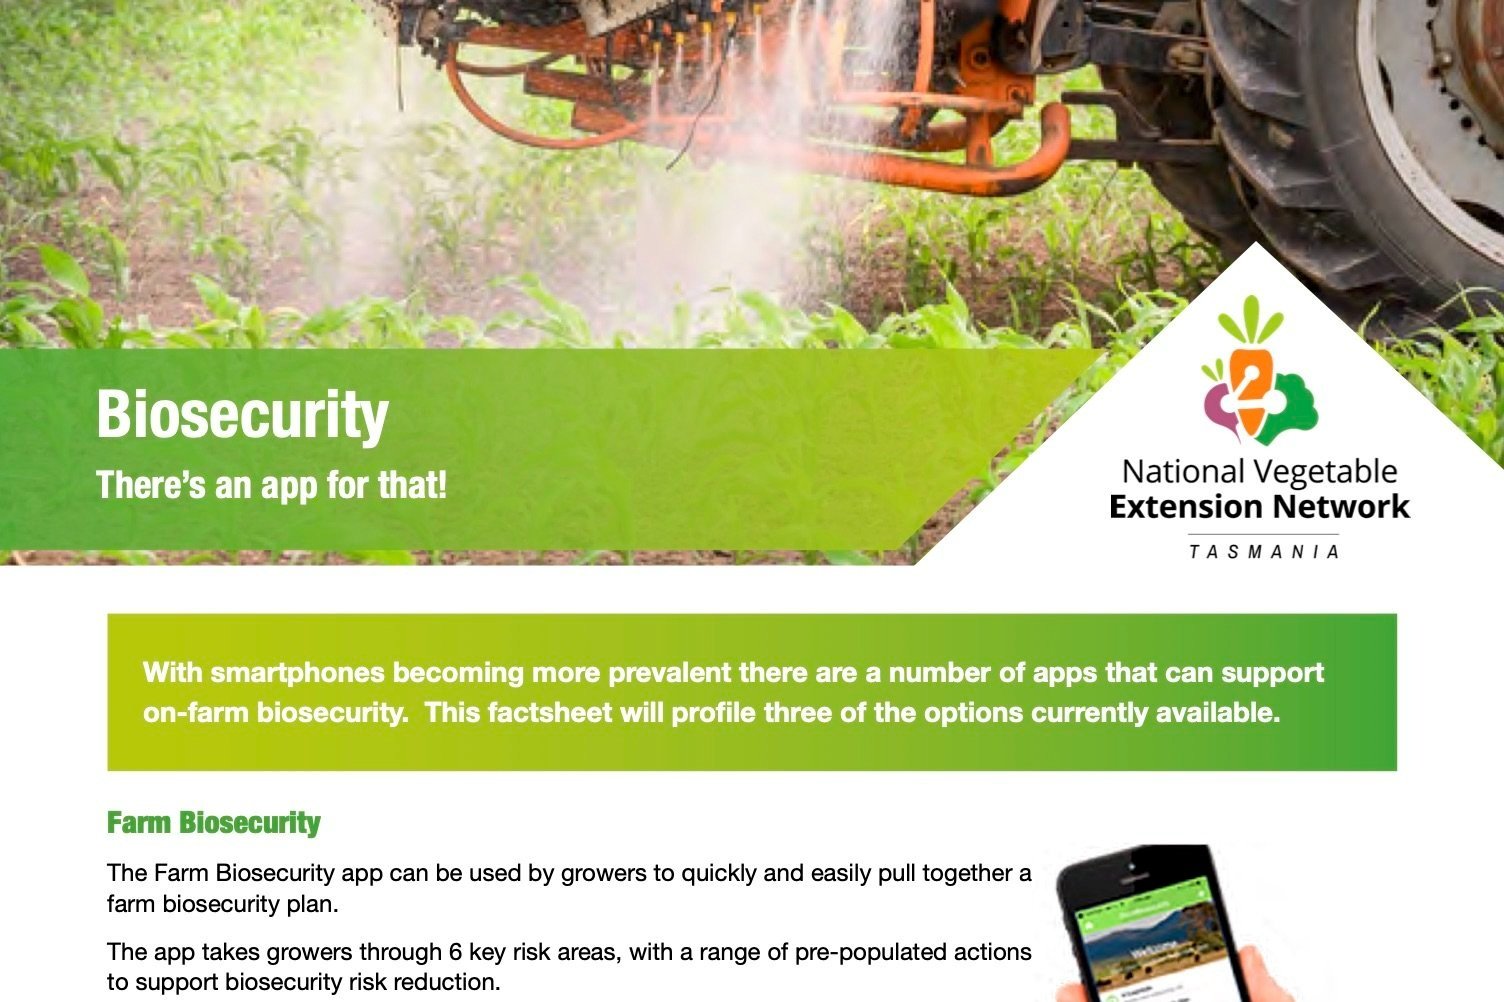 Biosecurity - There's an app for that!